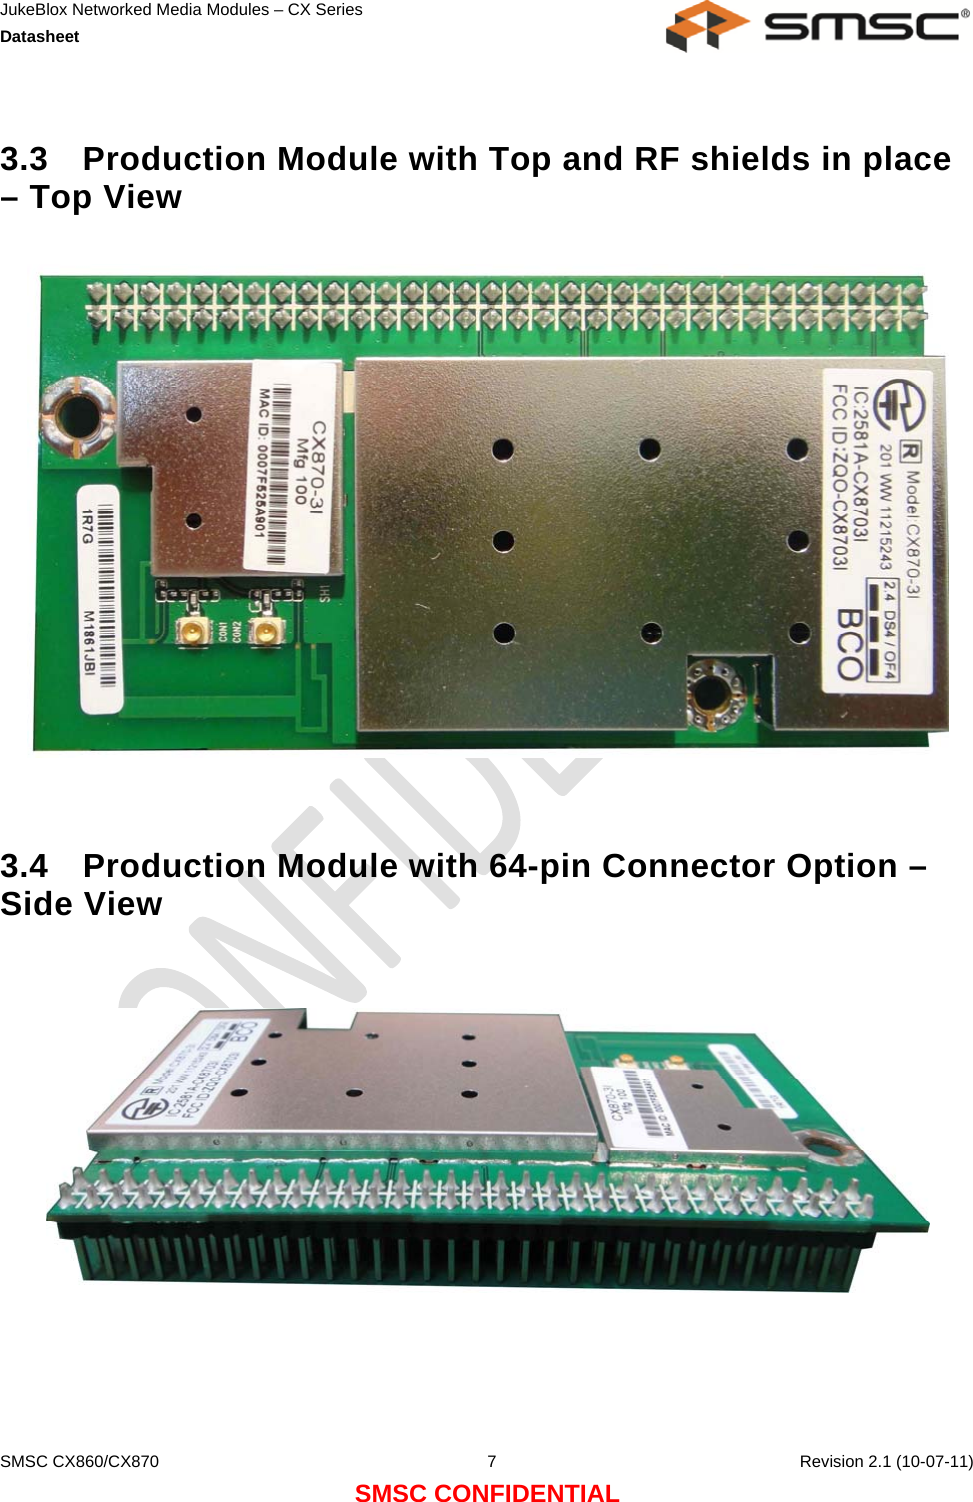 JukeBlox Networked Media Modules – CX Series  Datasheet    SMSC CX860/CX870  7    Revision 2.1 (10-07-11) SMSC CONFIDENTIAL  3.3  Production Module with Top and RF shields in place – Top View     3.4 Production Module with 64-pin Connector Option – Side View   